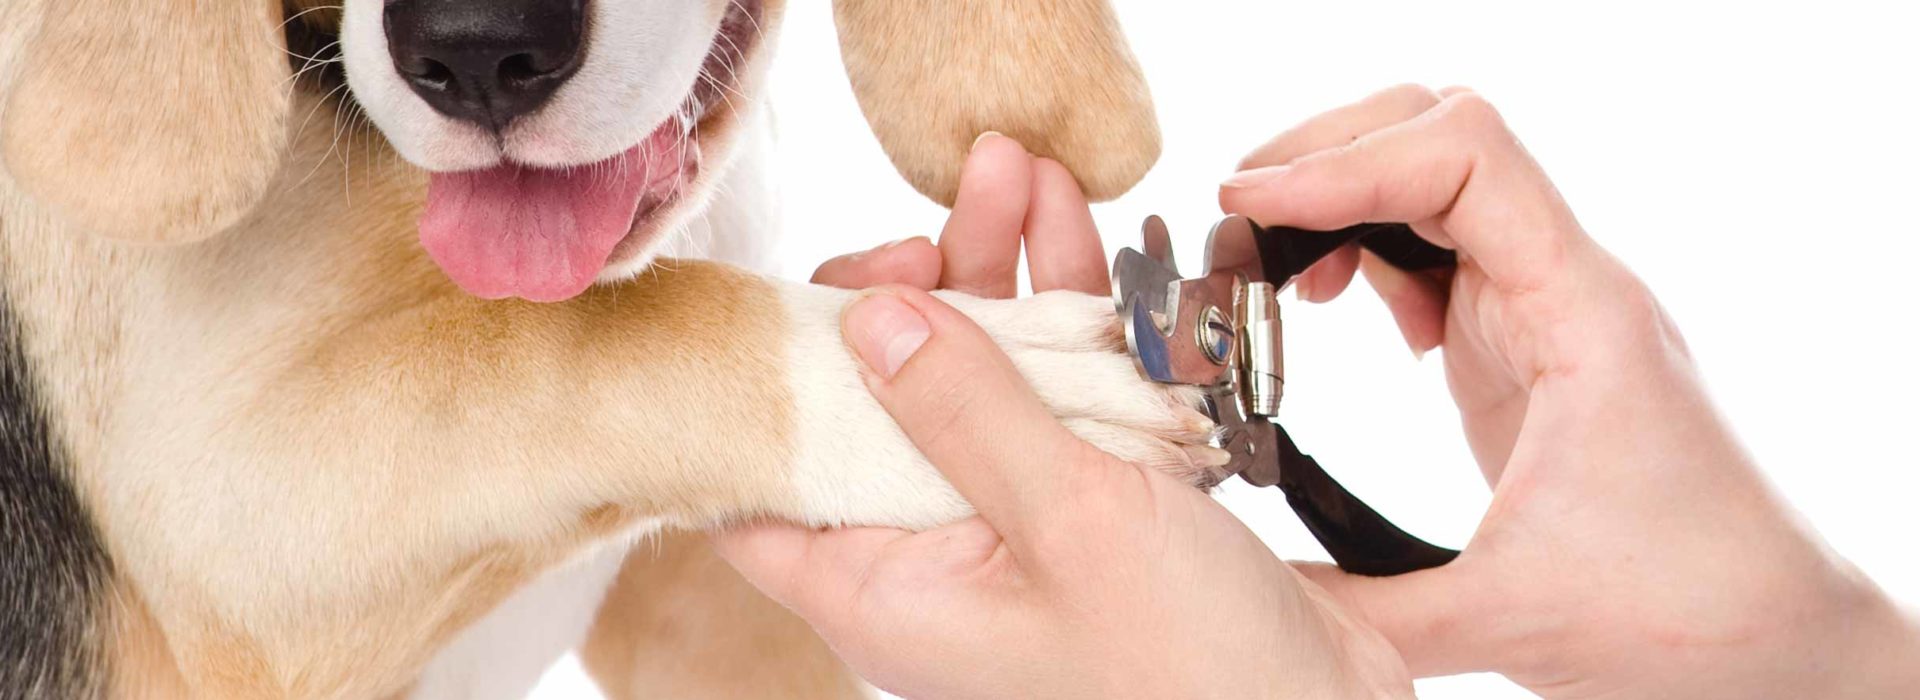 Dog getting its nails trimmed